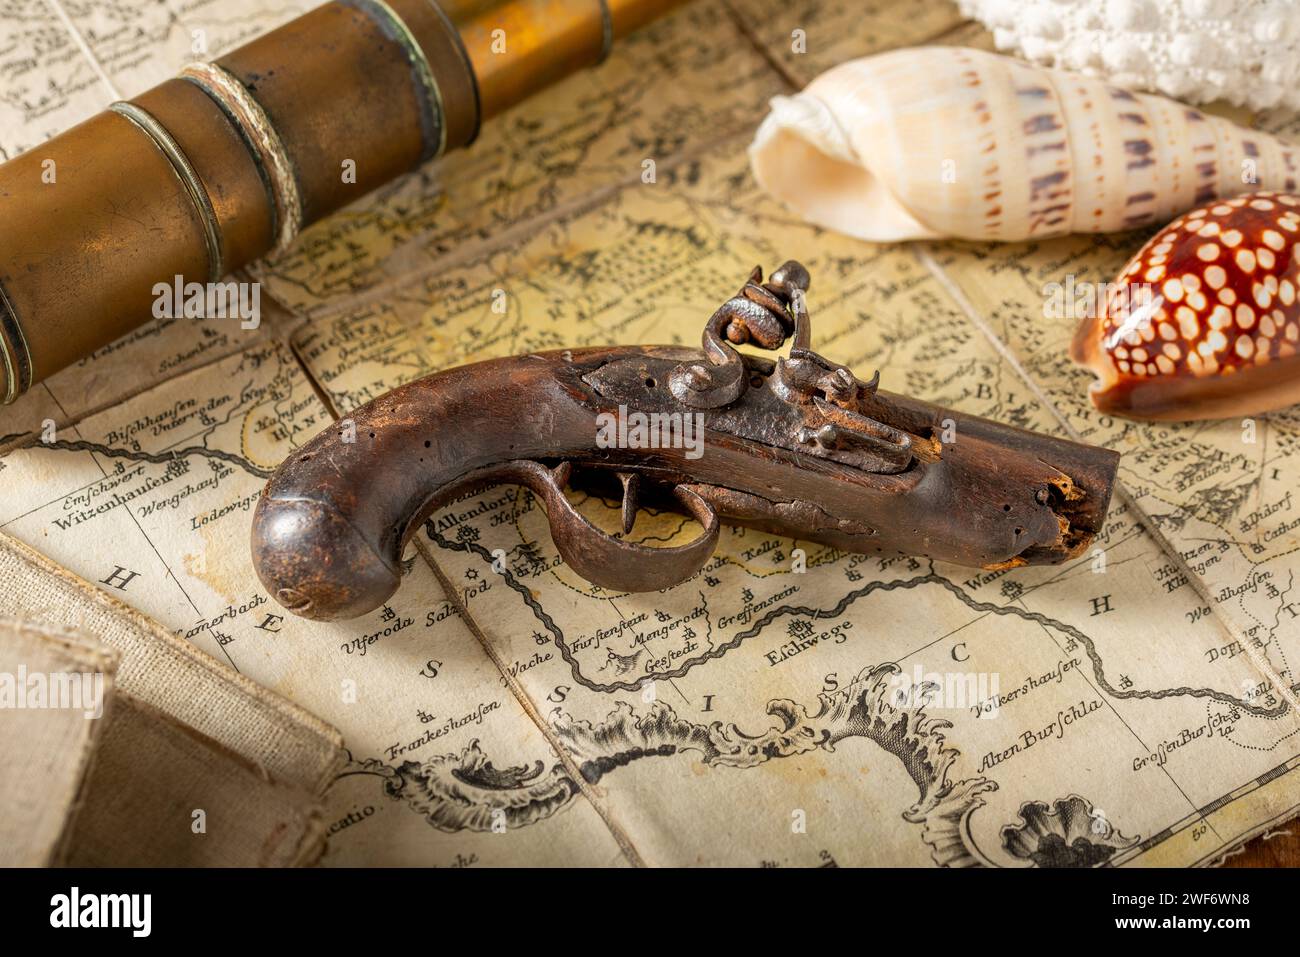 Antique pistol on a map with a copper spyglass and some sea shells Stock Photo